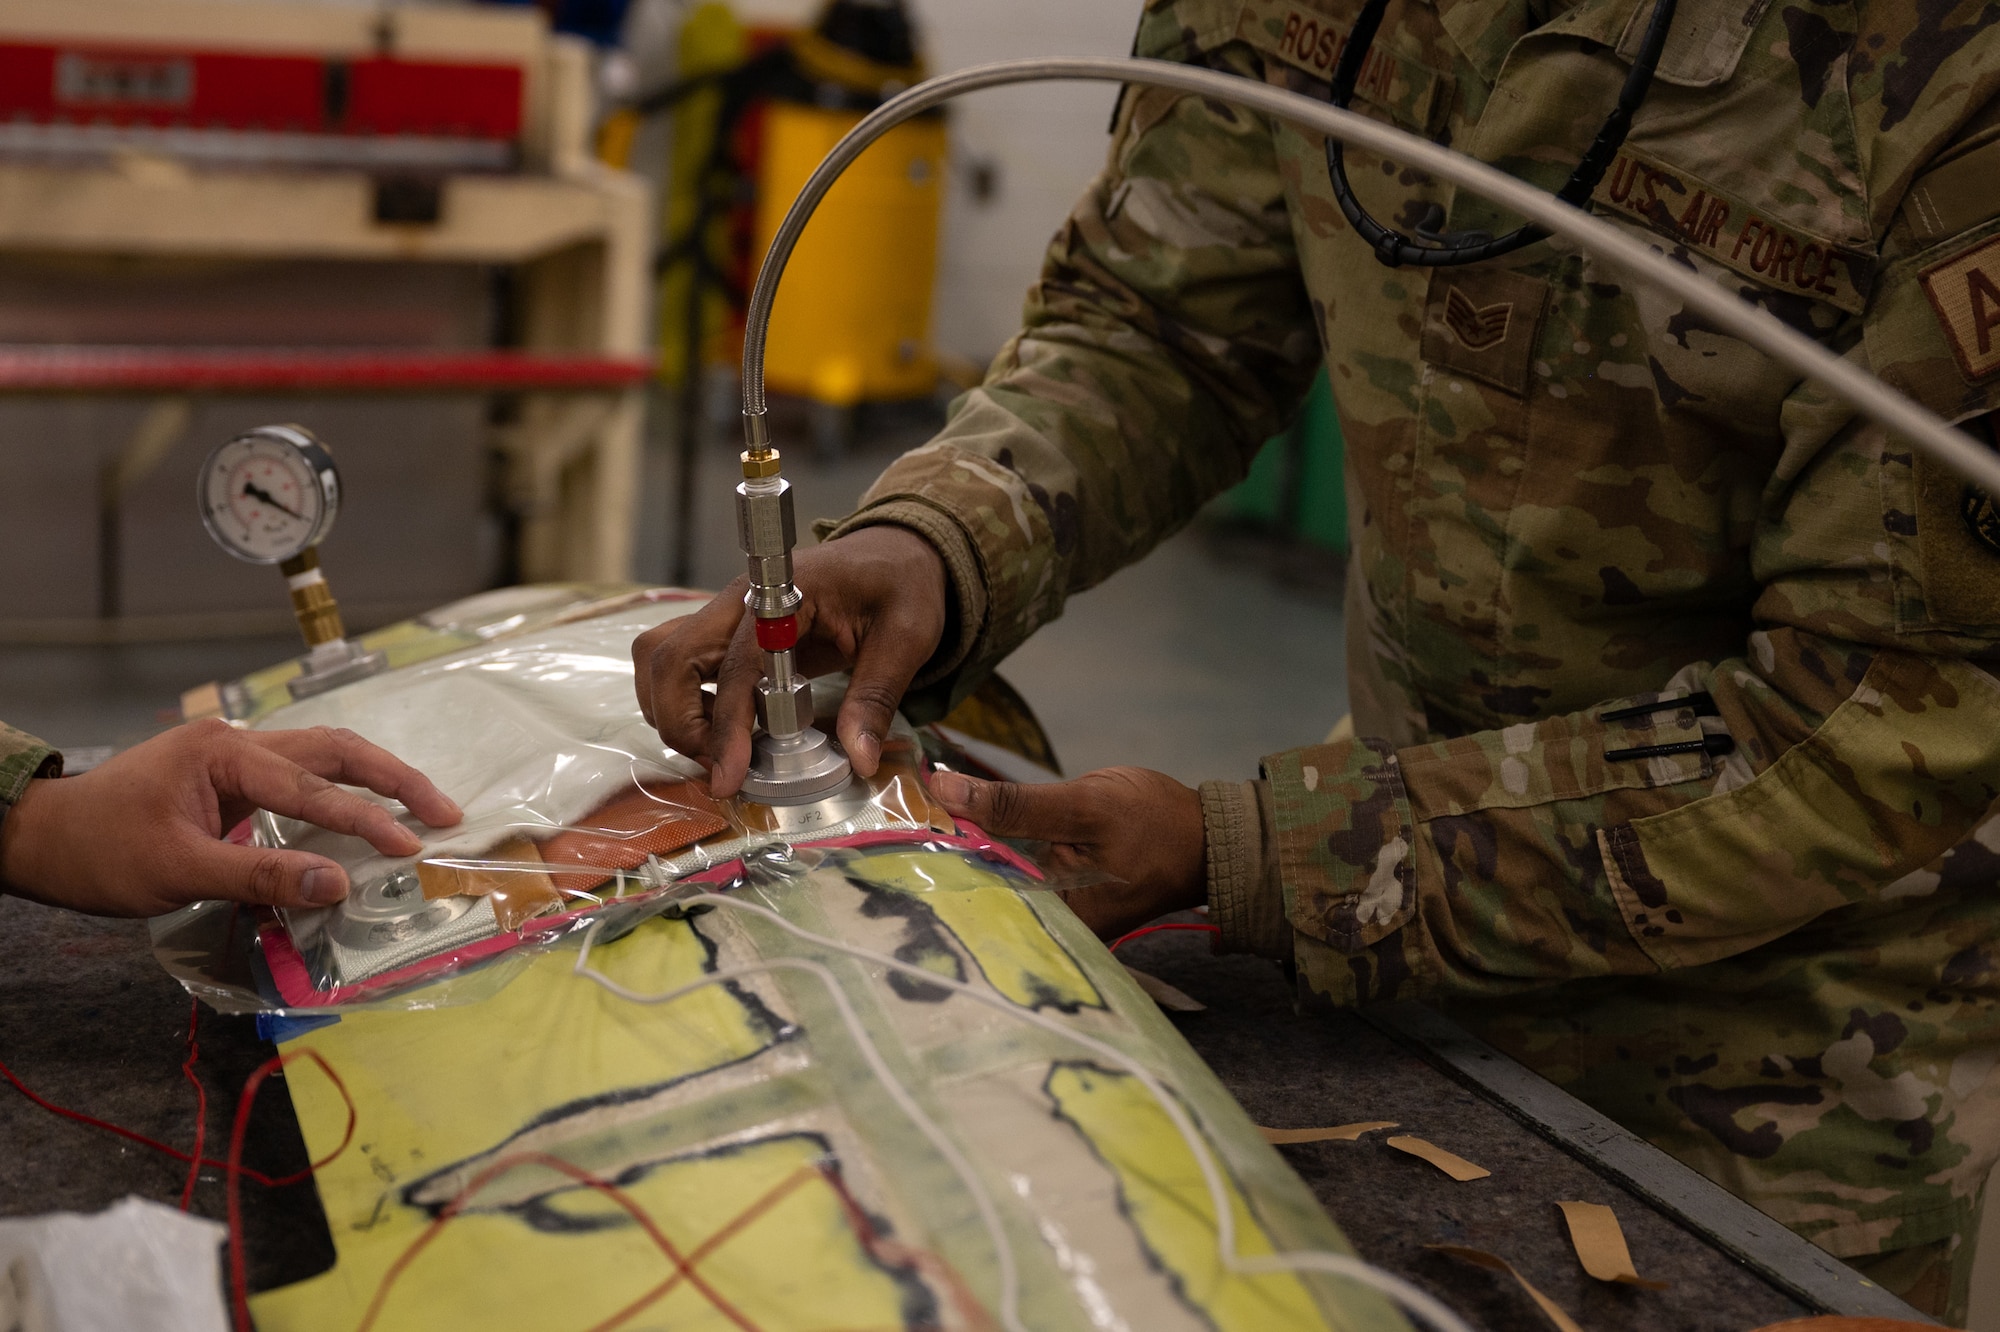 U.S. Air Force Staff Sgt. Alan Roseman, 51st Maintenance Squadron aircraft structural maintenance craftsman, prepares a vacuum seal hose at Osan Air Base, Republic of Korea, Feb. 8, 2024. The pressure going through the hose is regulated to ensure a smooth, seamless seal of fiberglass laid on the structure. Precision in structural aircraft maintenance is paramount to guaranteeing peak performance of 51st Fighter Wing aircraft. (U.S. Air Force photo by Senior Airman Brittany Russell)